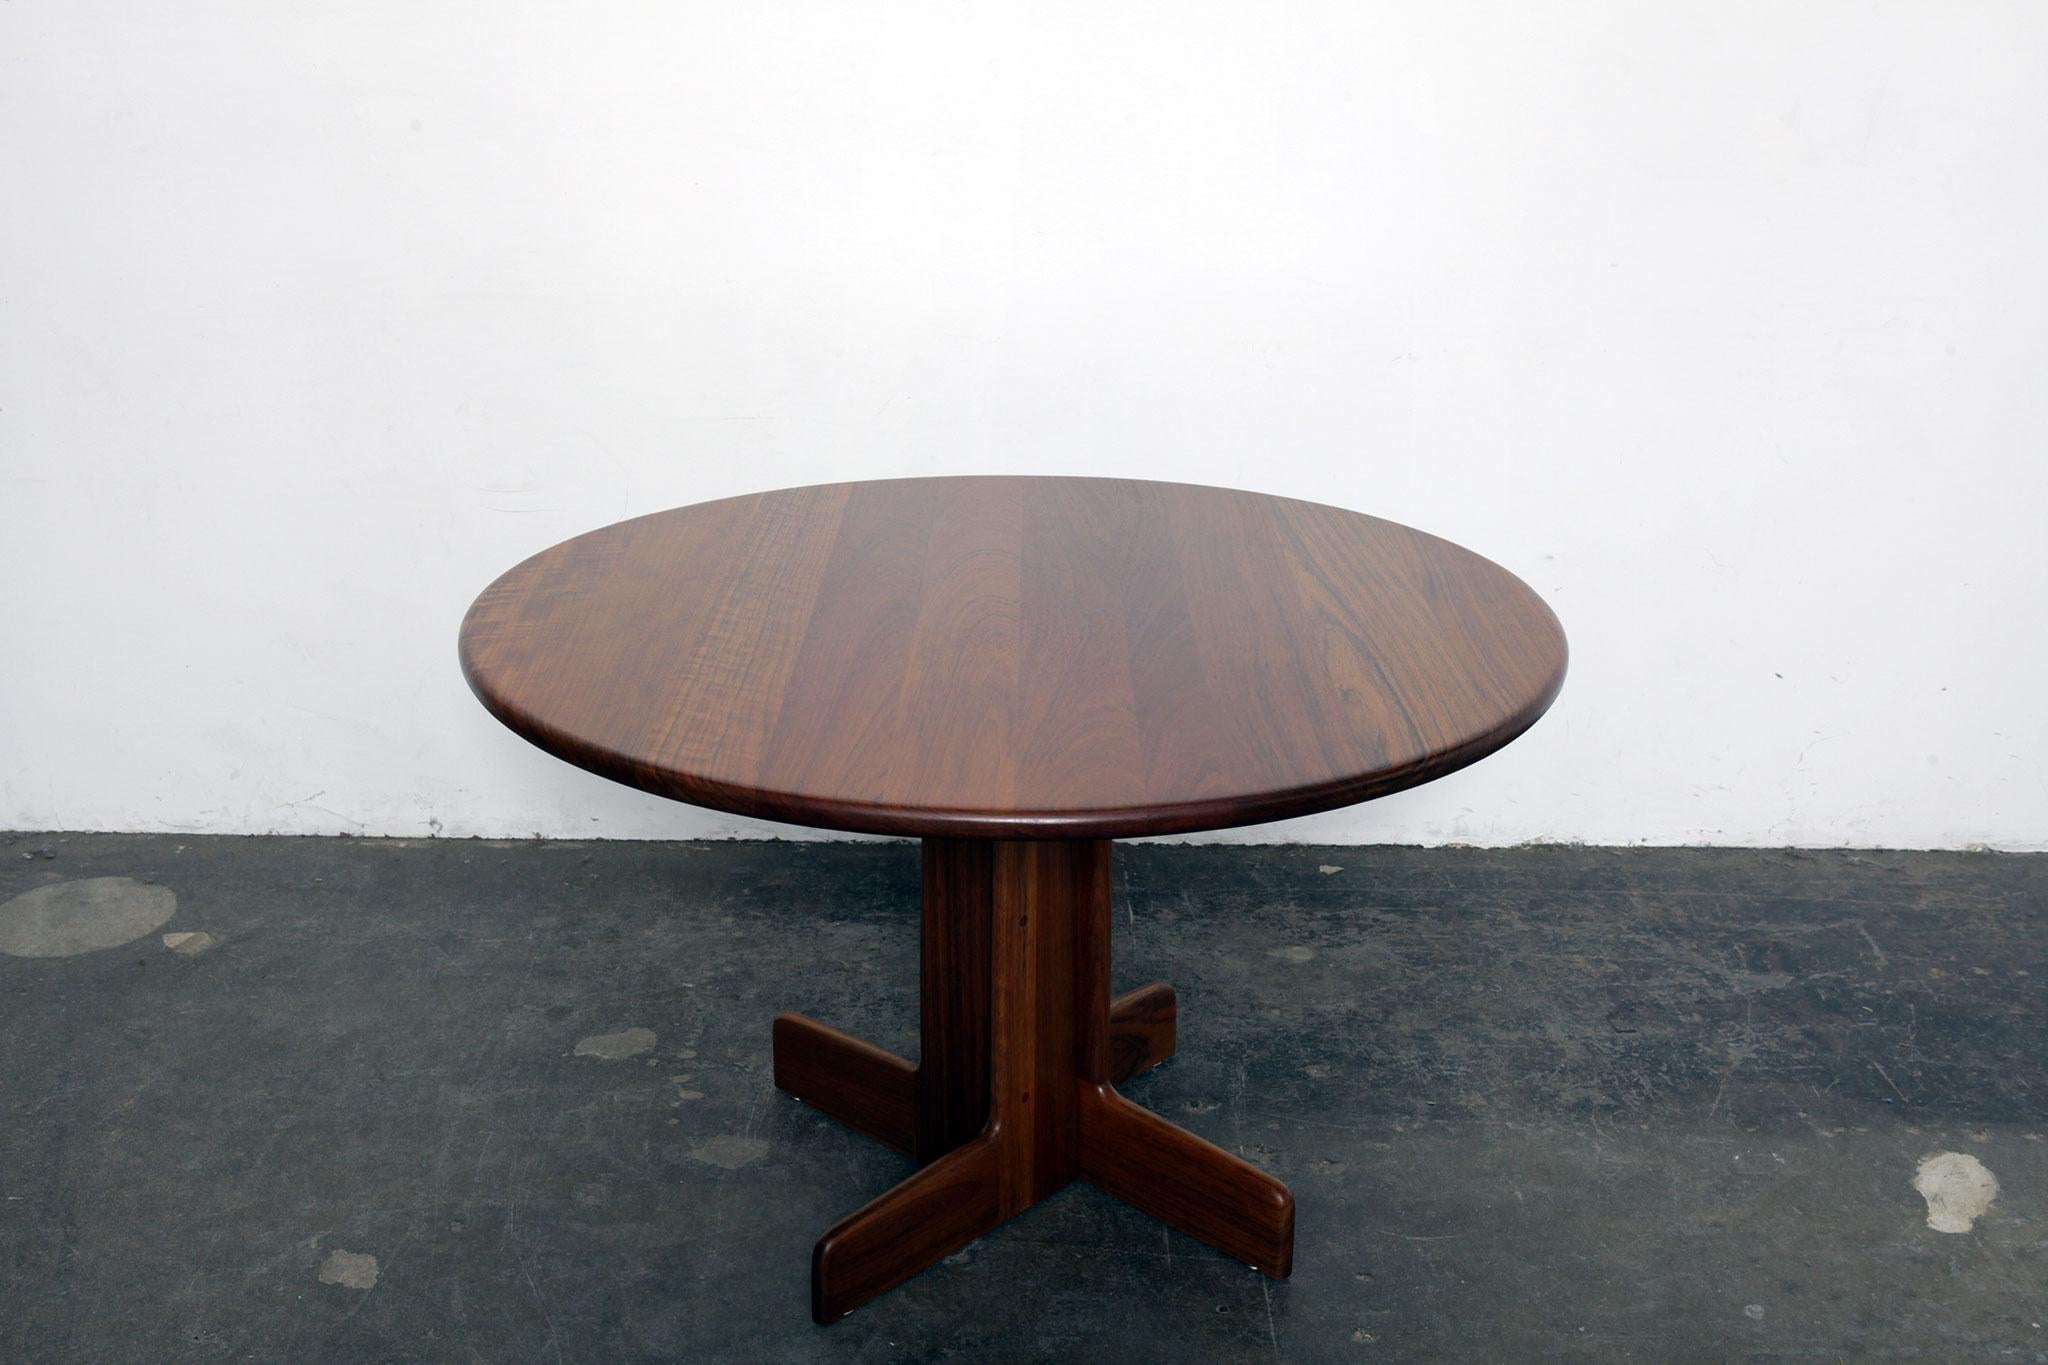 Solid African sedua wood round dining table with pedestal base, designed by Gerald McCabe, USA, 1970s. Table does not have extensions. Table has been fully refinished with new lacquer. An ideal 4 person table.